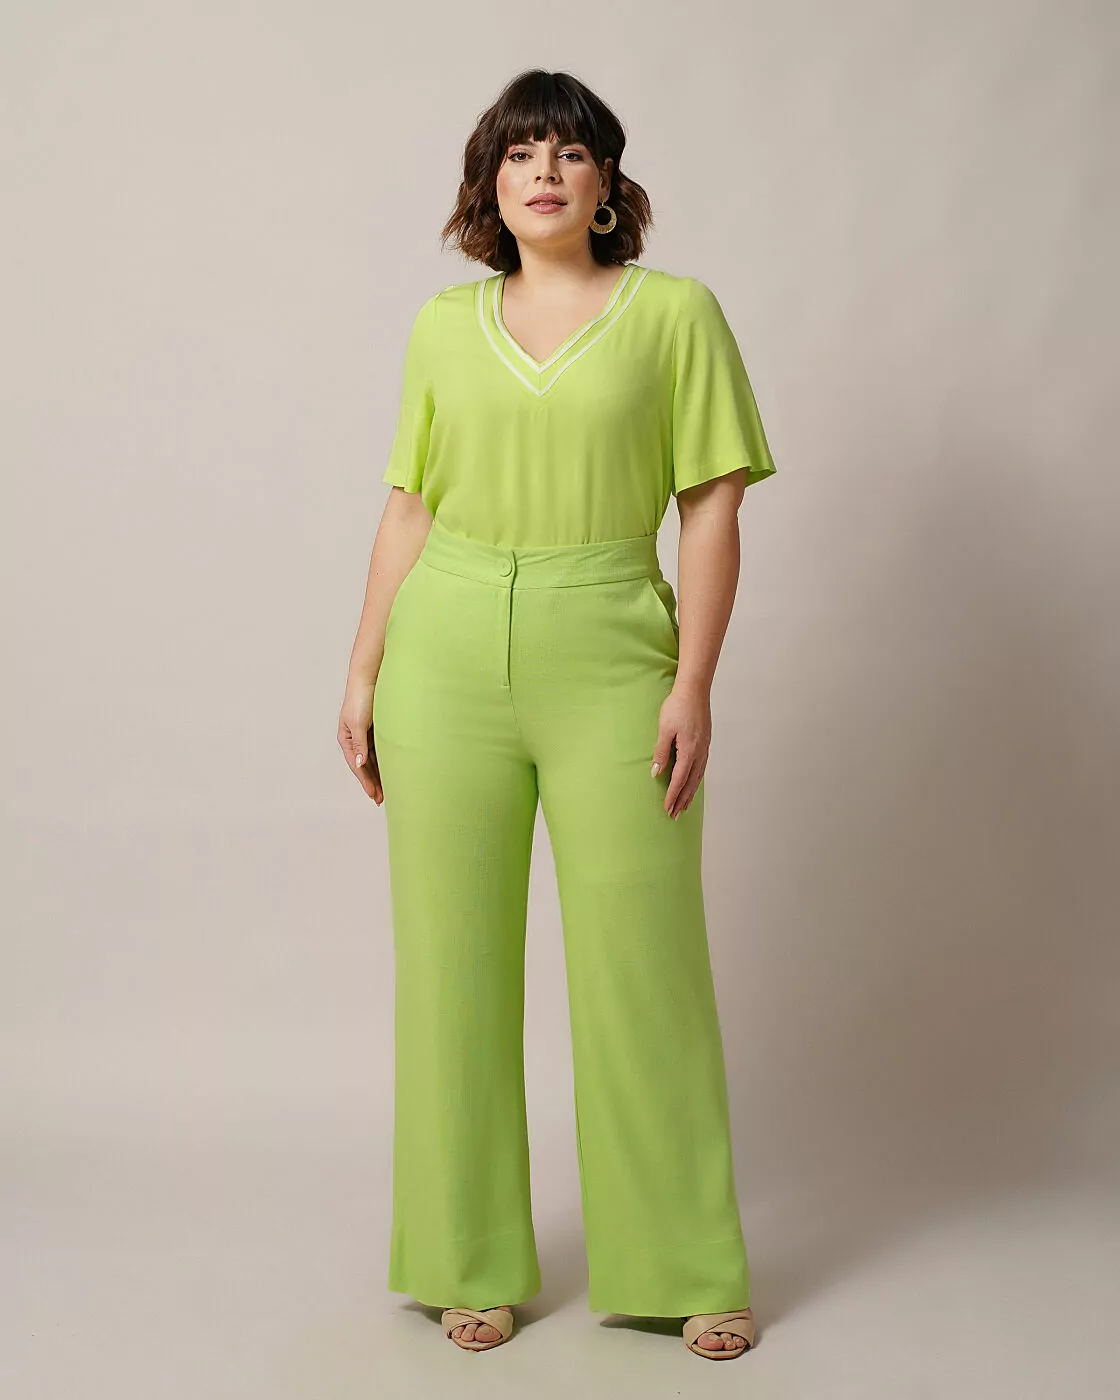 Trousers and Shirt - Shanes Curve Designer 